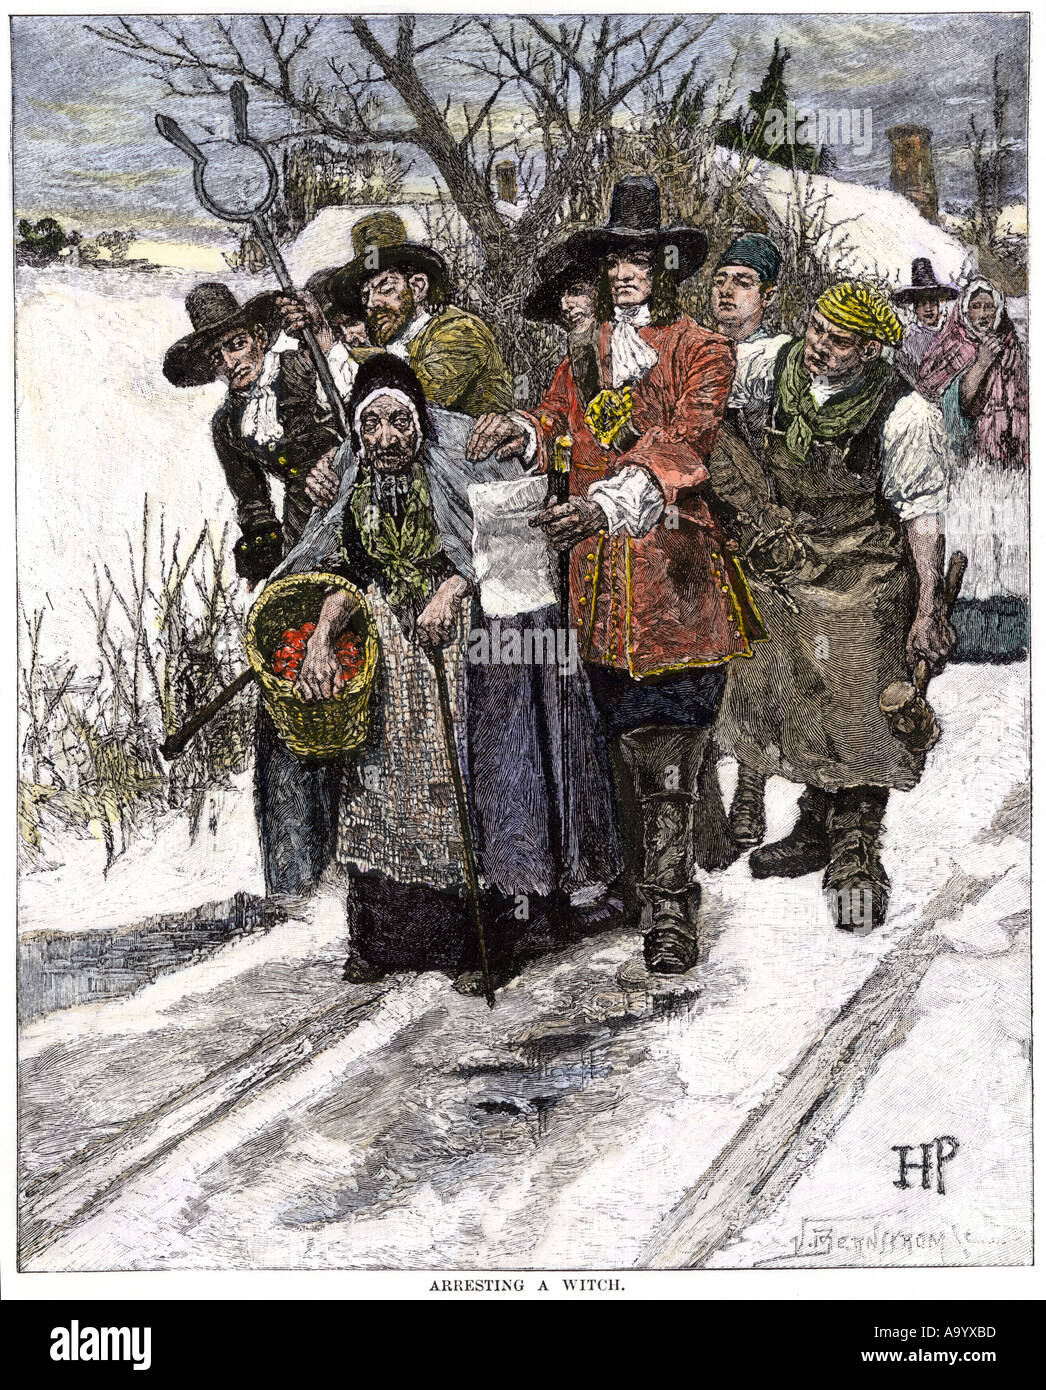 New England colonists arresting a witch 1600s. Hand-colored woodcut of a Howard Pyle illustration Stock Photo